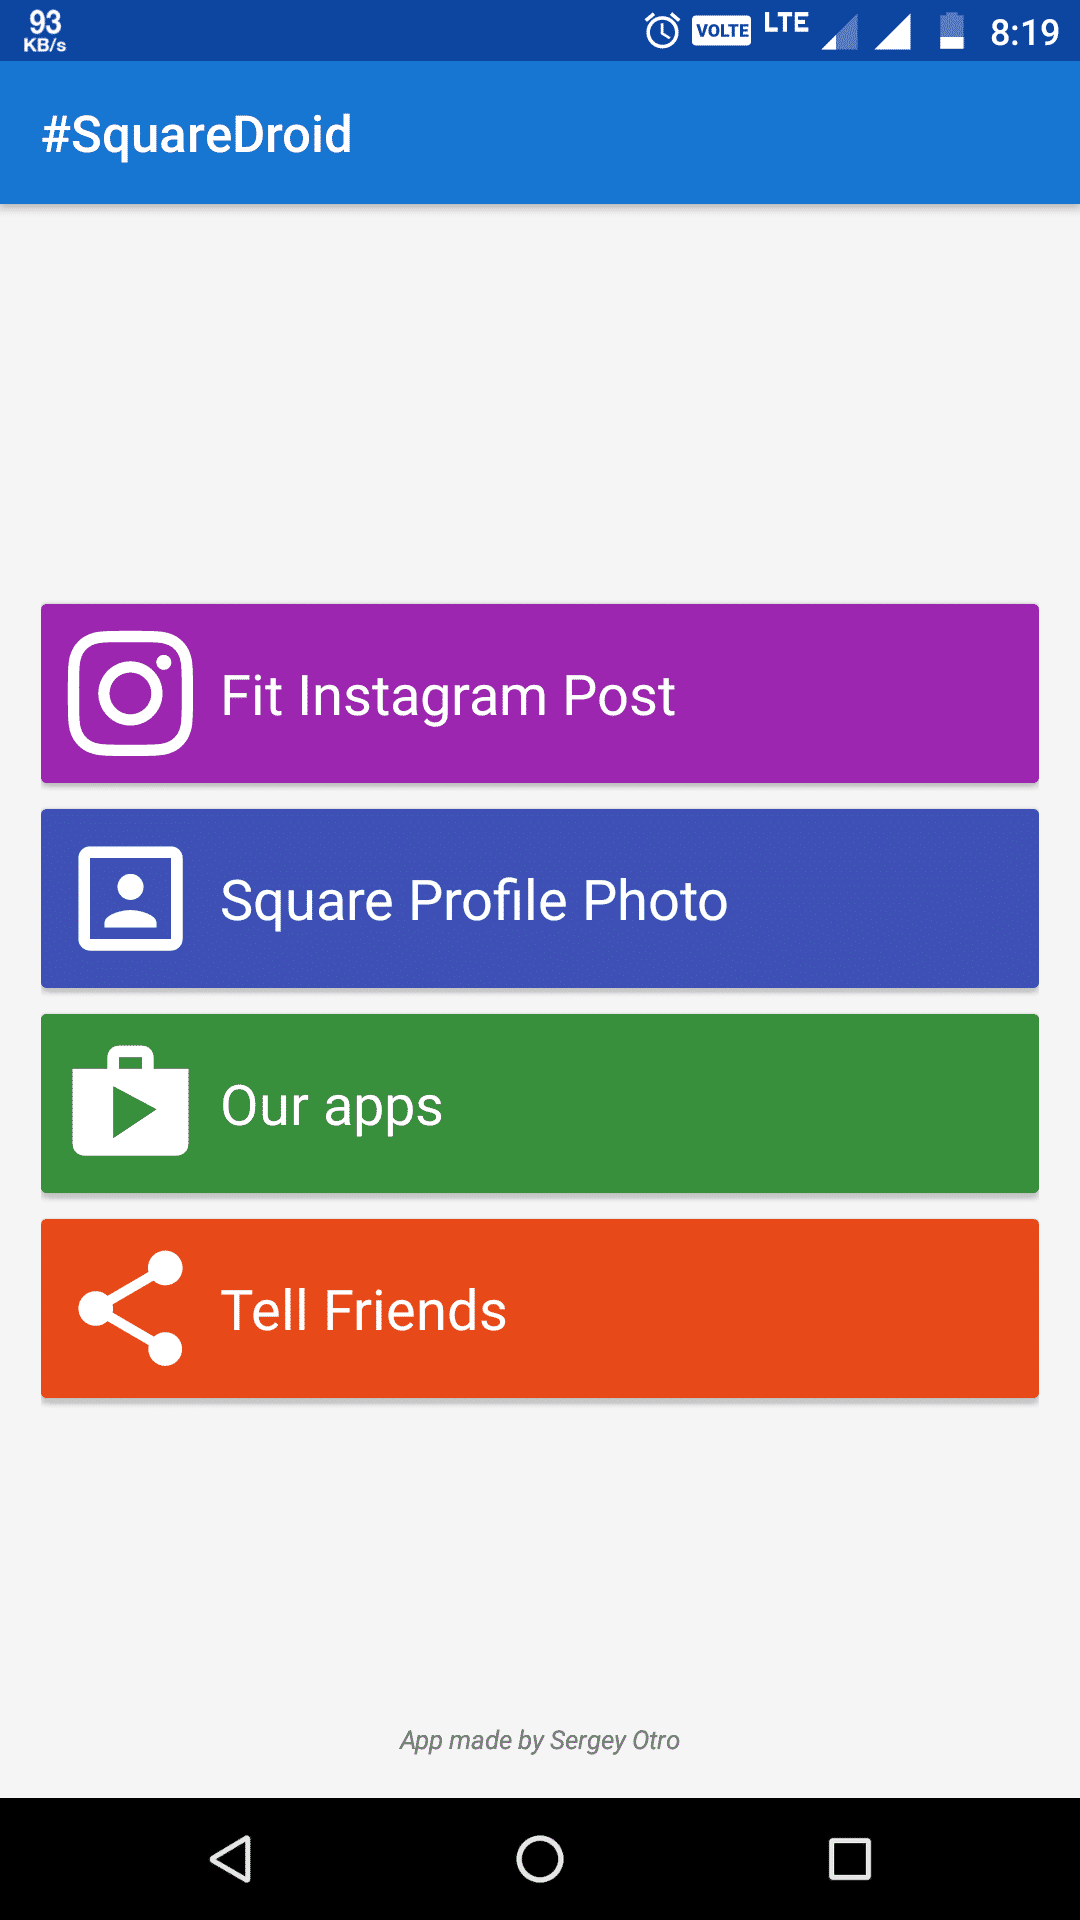 #SquareDroid Welcome page